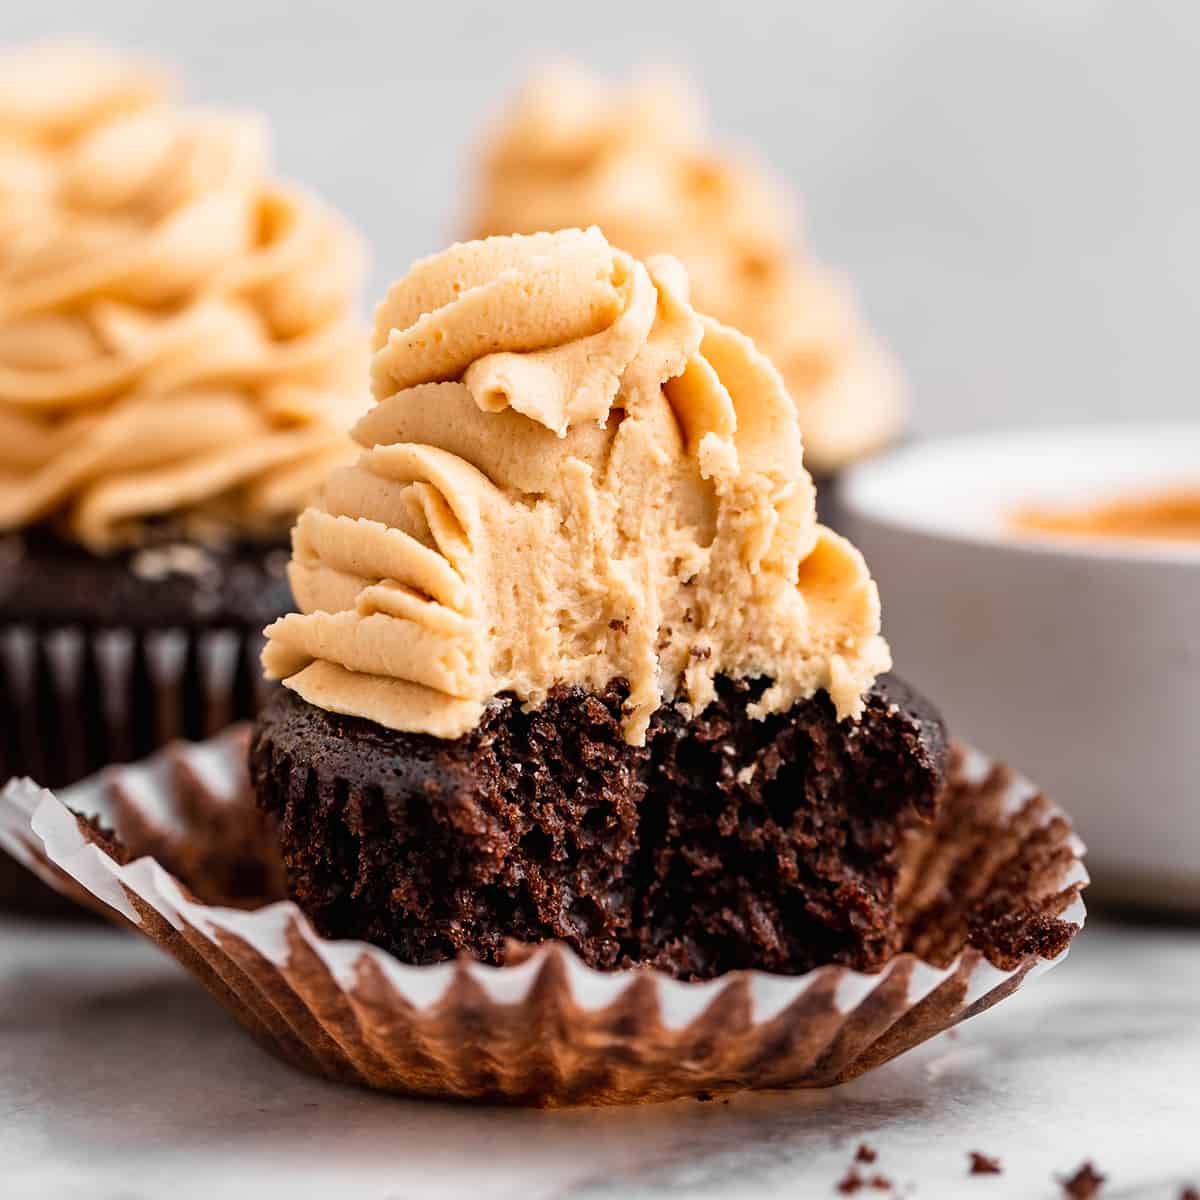 Peanut Butter Frosting on top of a chocolate cupcake with a bite taken out of it